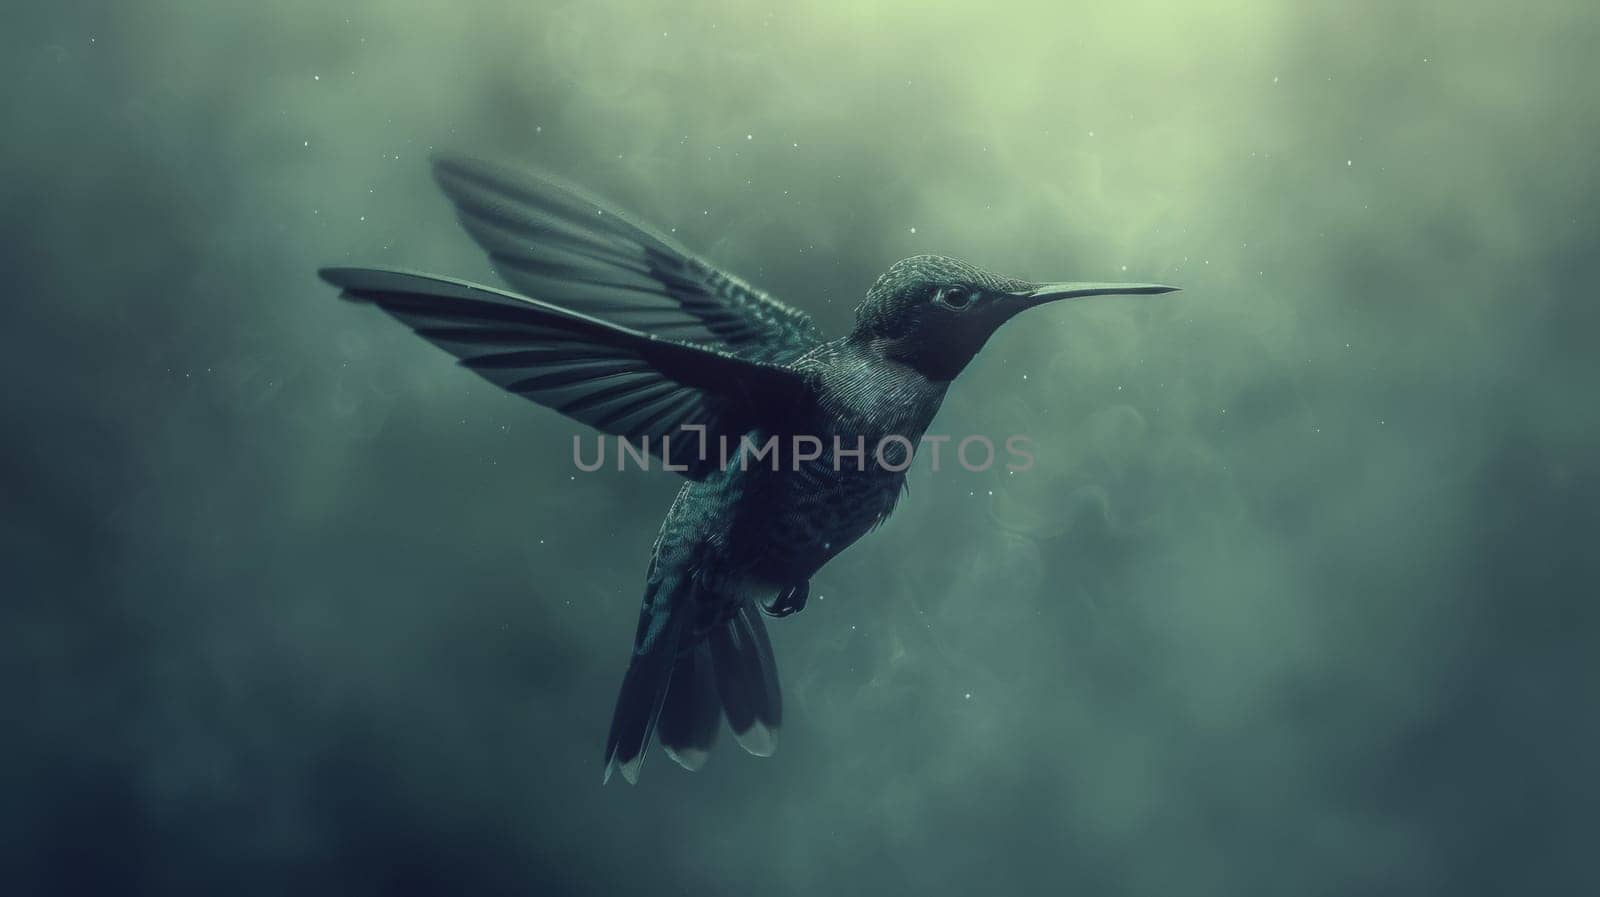 A hummingbird flying in the air with a green background